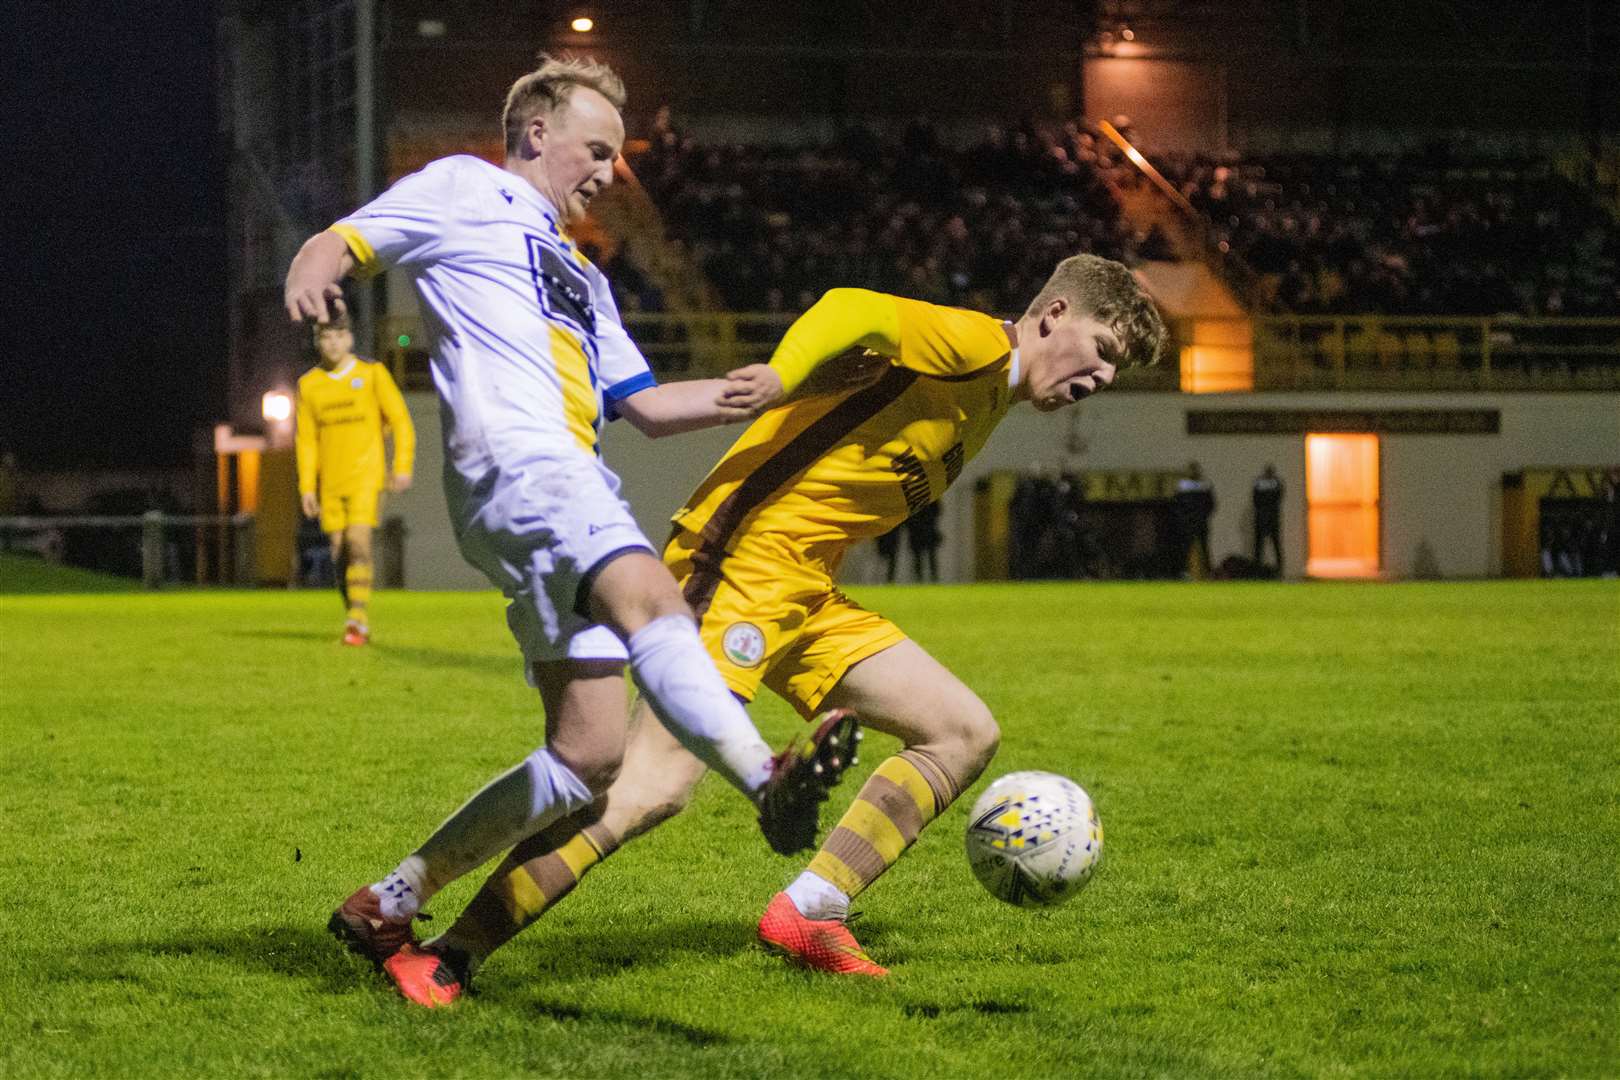 Ethan Cairns, who has been on loan at Forres Mechanics this season, made his Championship debut for Inverness Caley Thistle on Monday. Picture: Daniel Forsyth